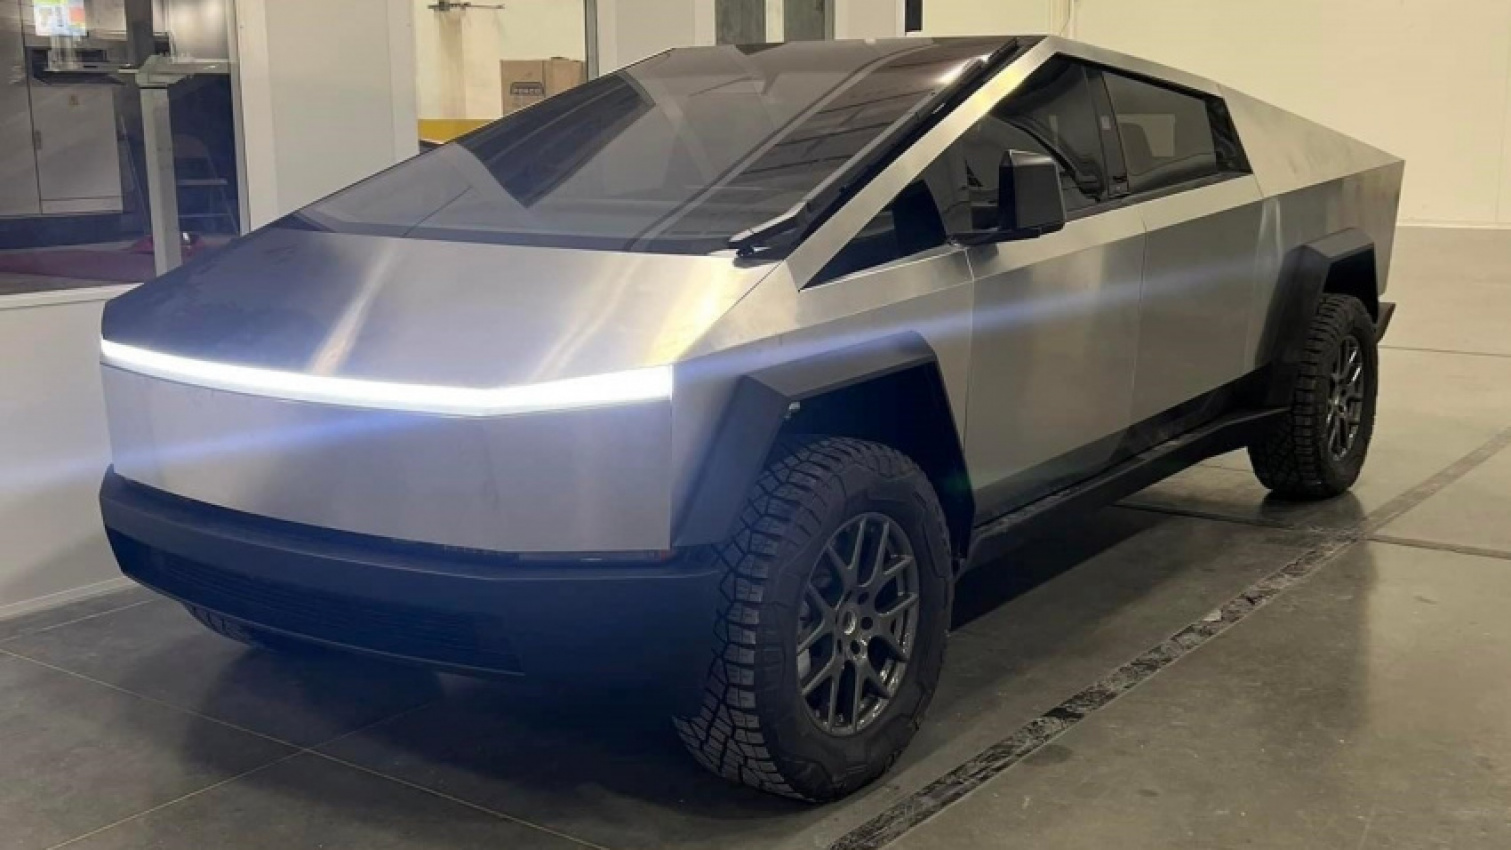 news, tesla, cars, cybertruck, tesla cybertruck video leak gives us our best look yet — and highlights design flaws